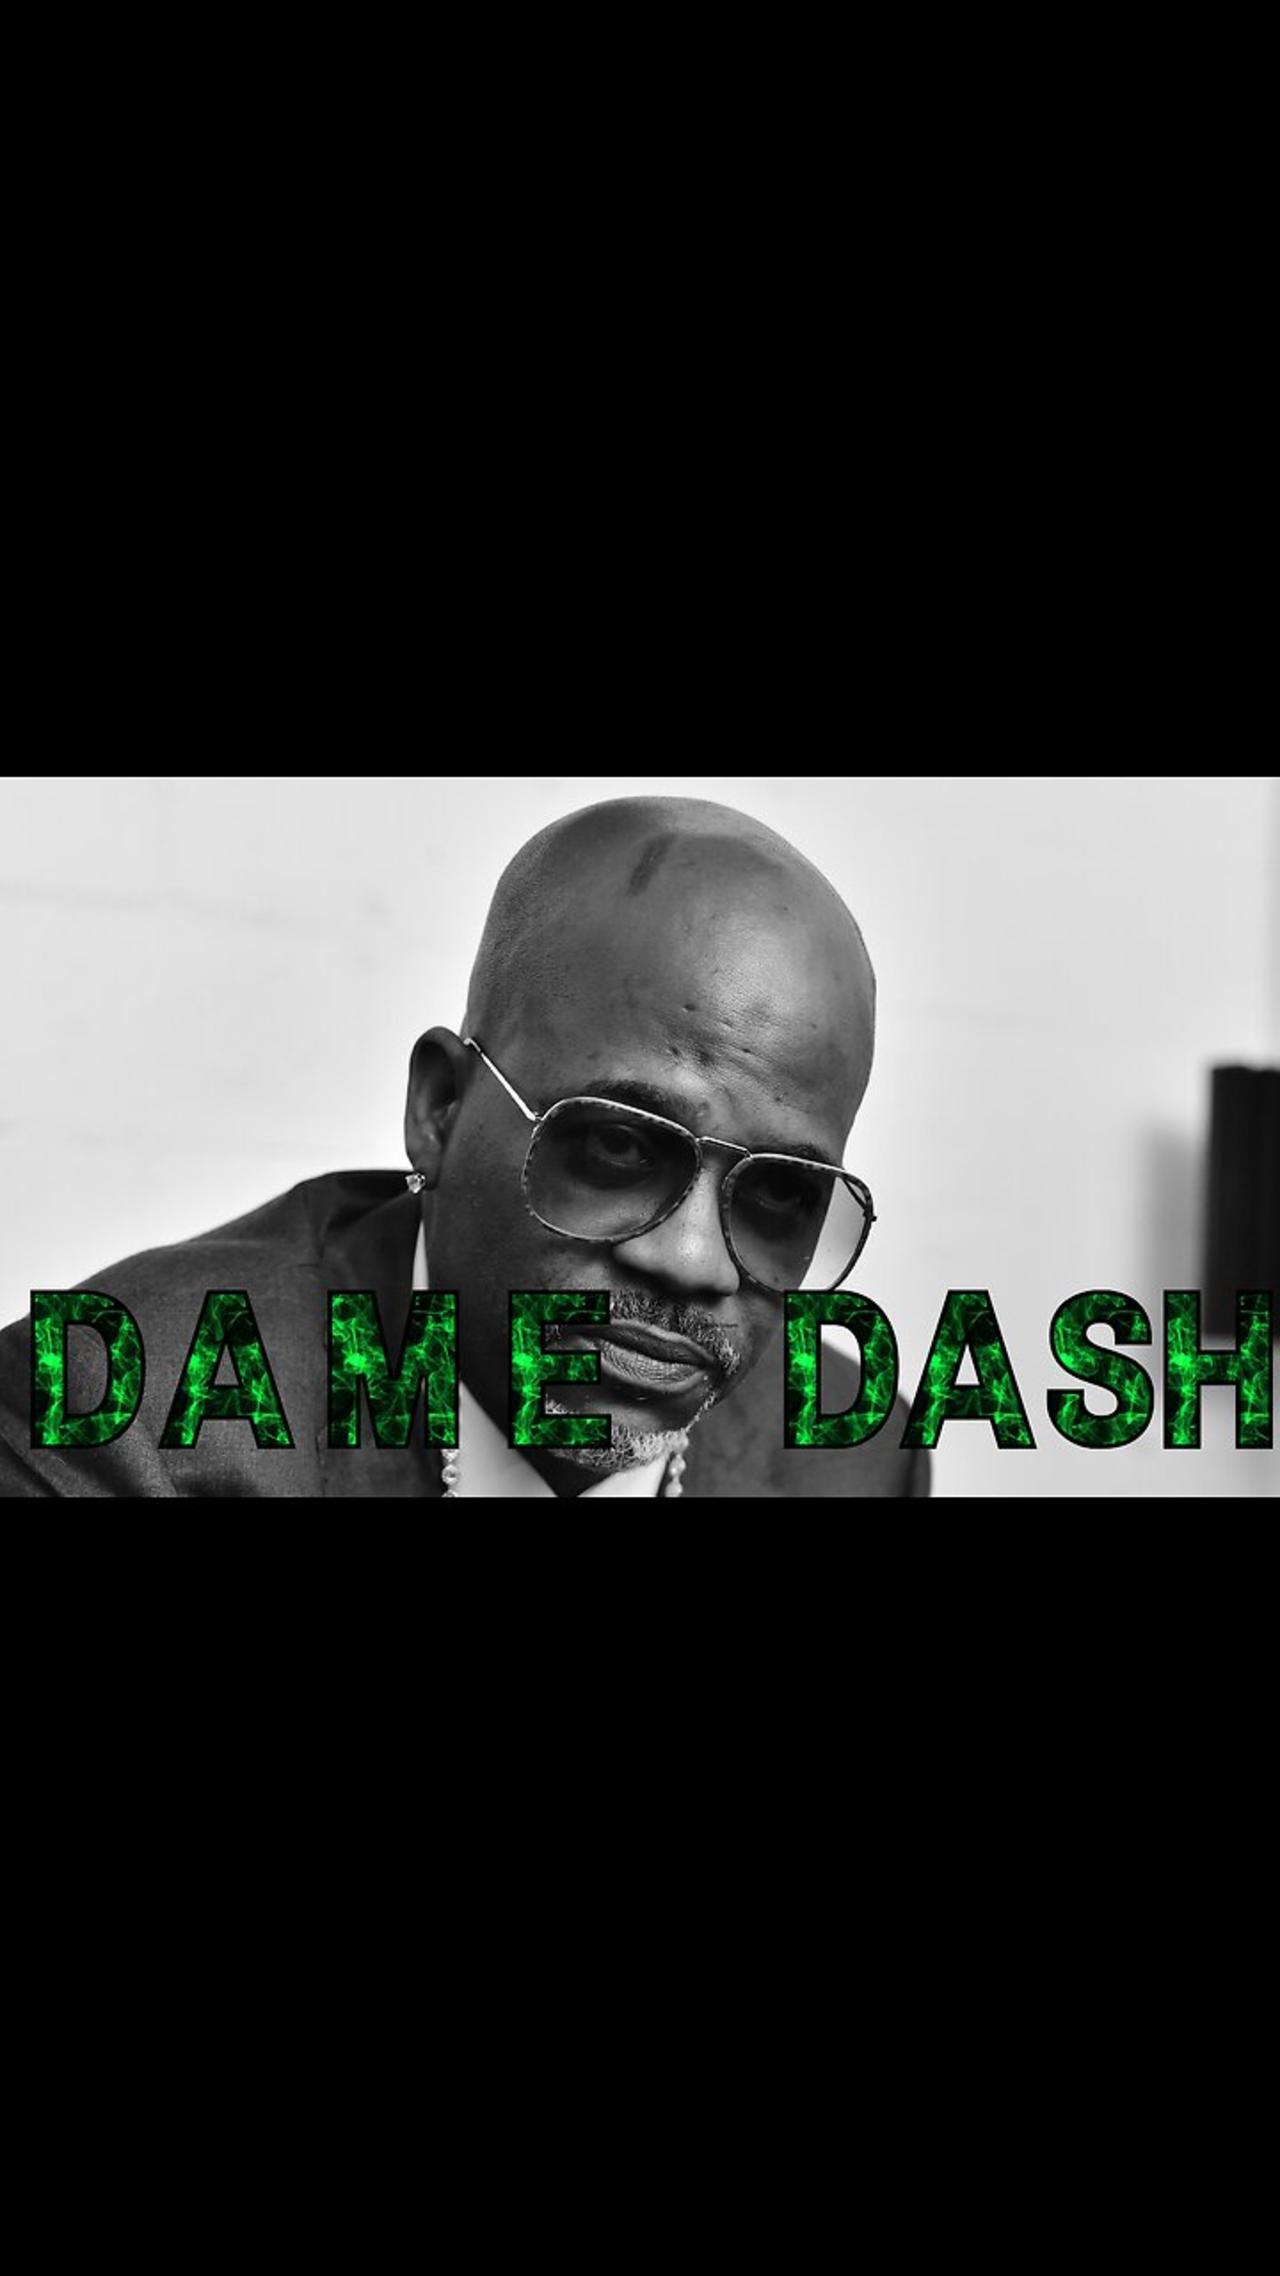 DAME DASH - I´m going to make 100 millon worth of content